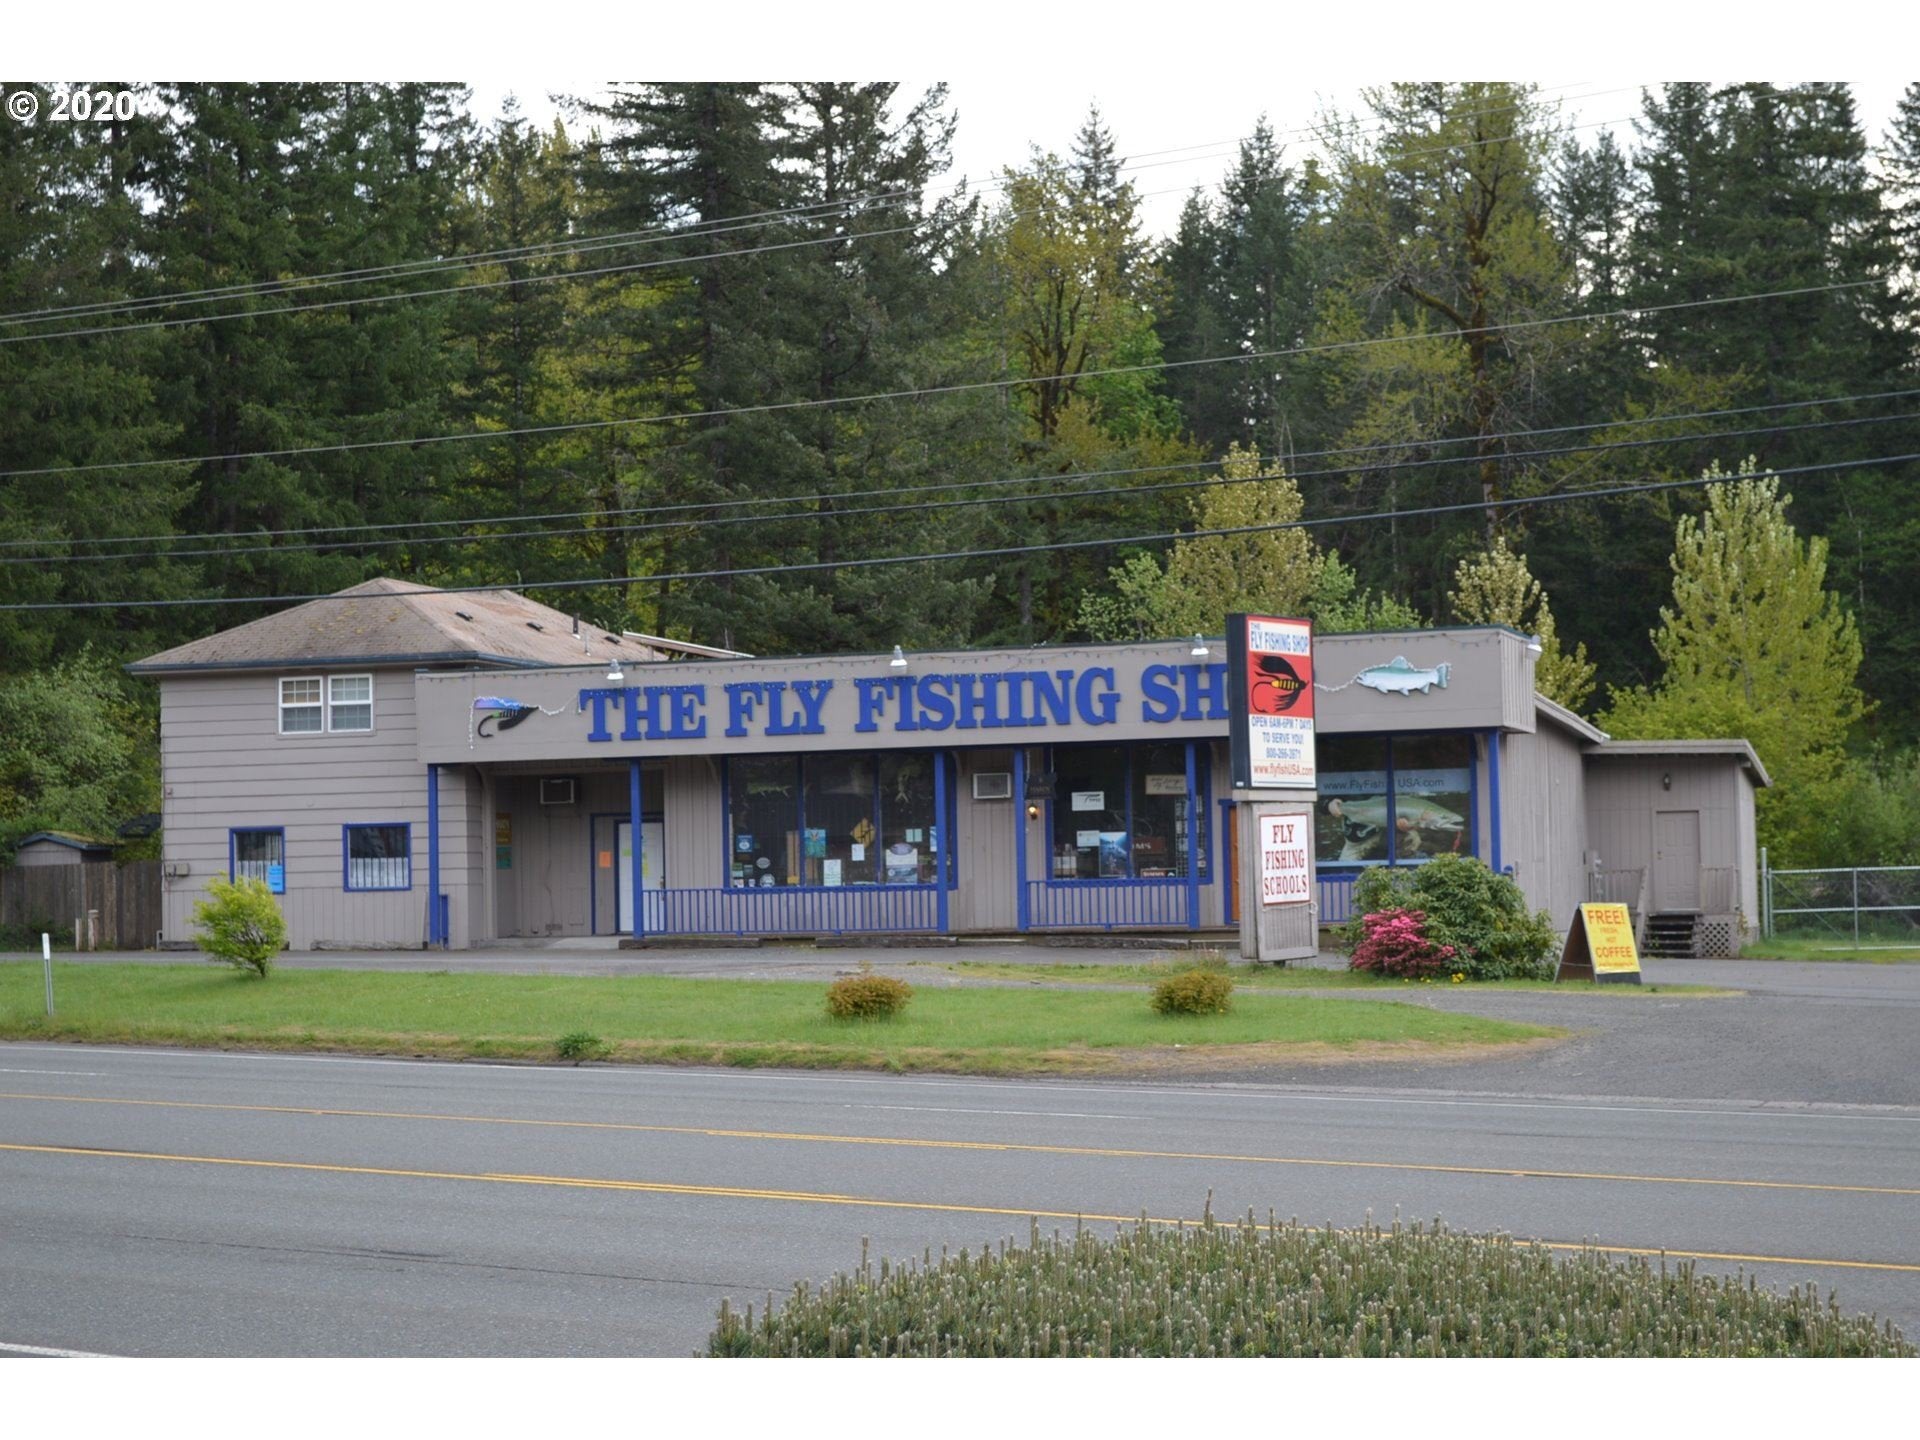 The Fly Fishing Shop in Welches, OR is For Sale